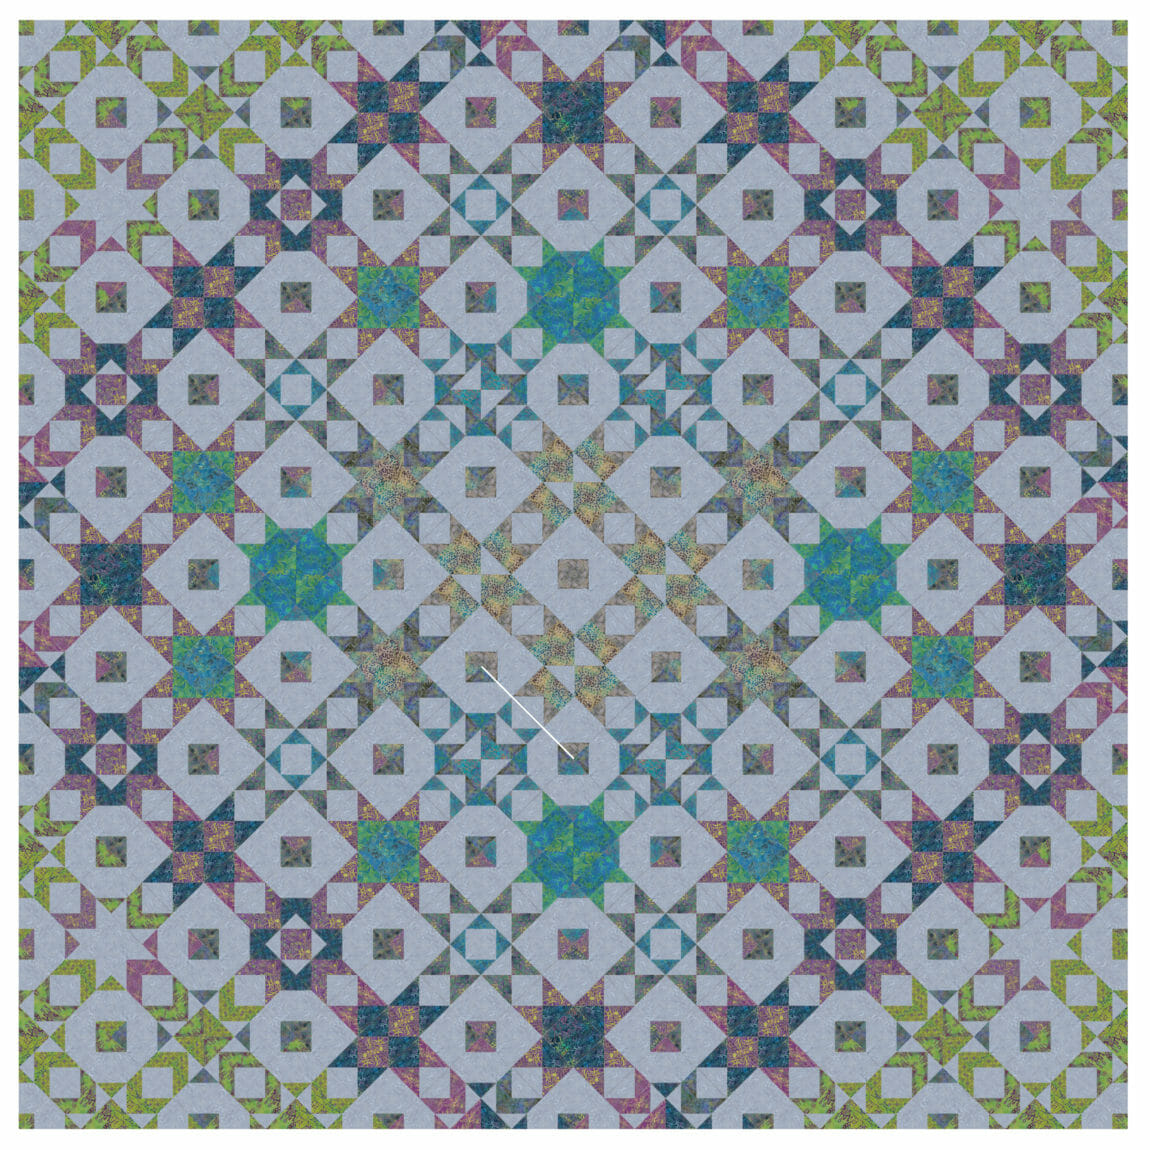 Block of the Month, free block of the month, starburst galaxy, quilt addicts anonymous